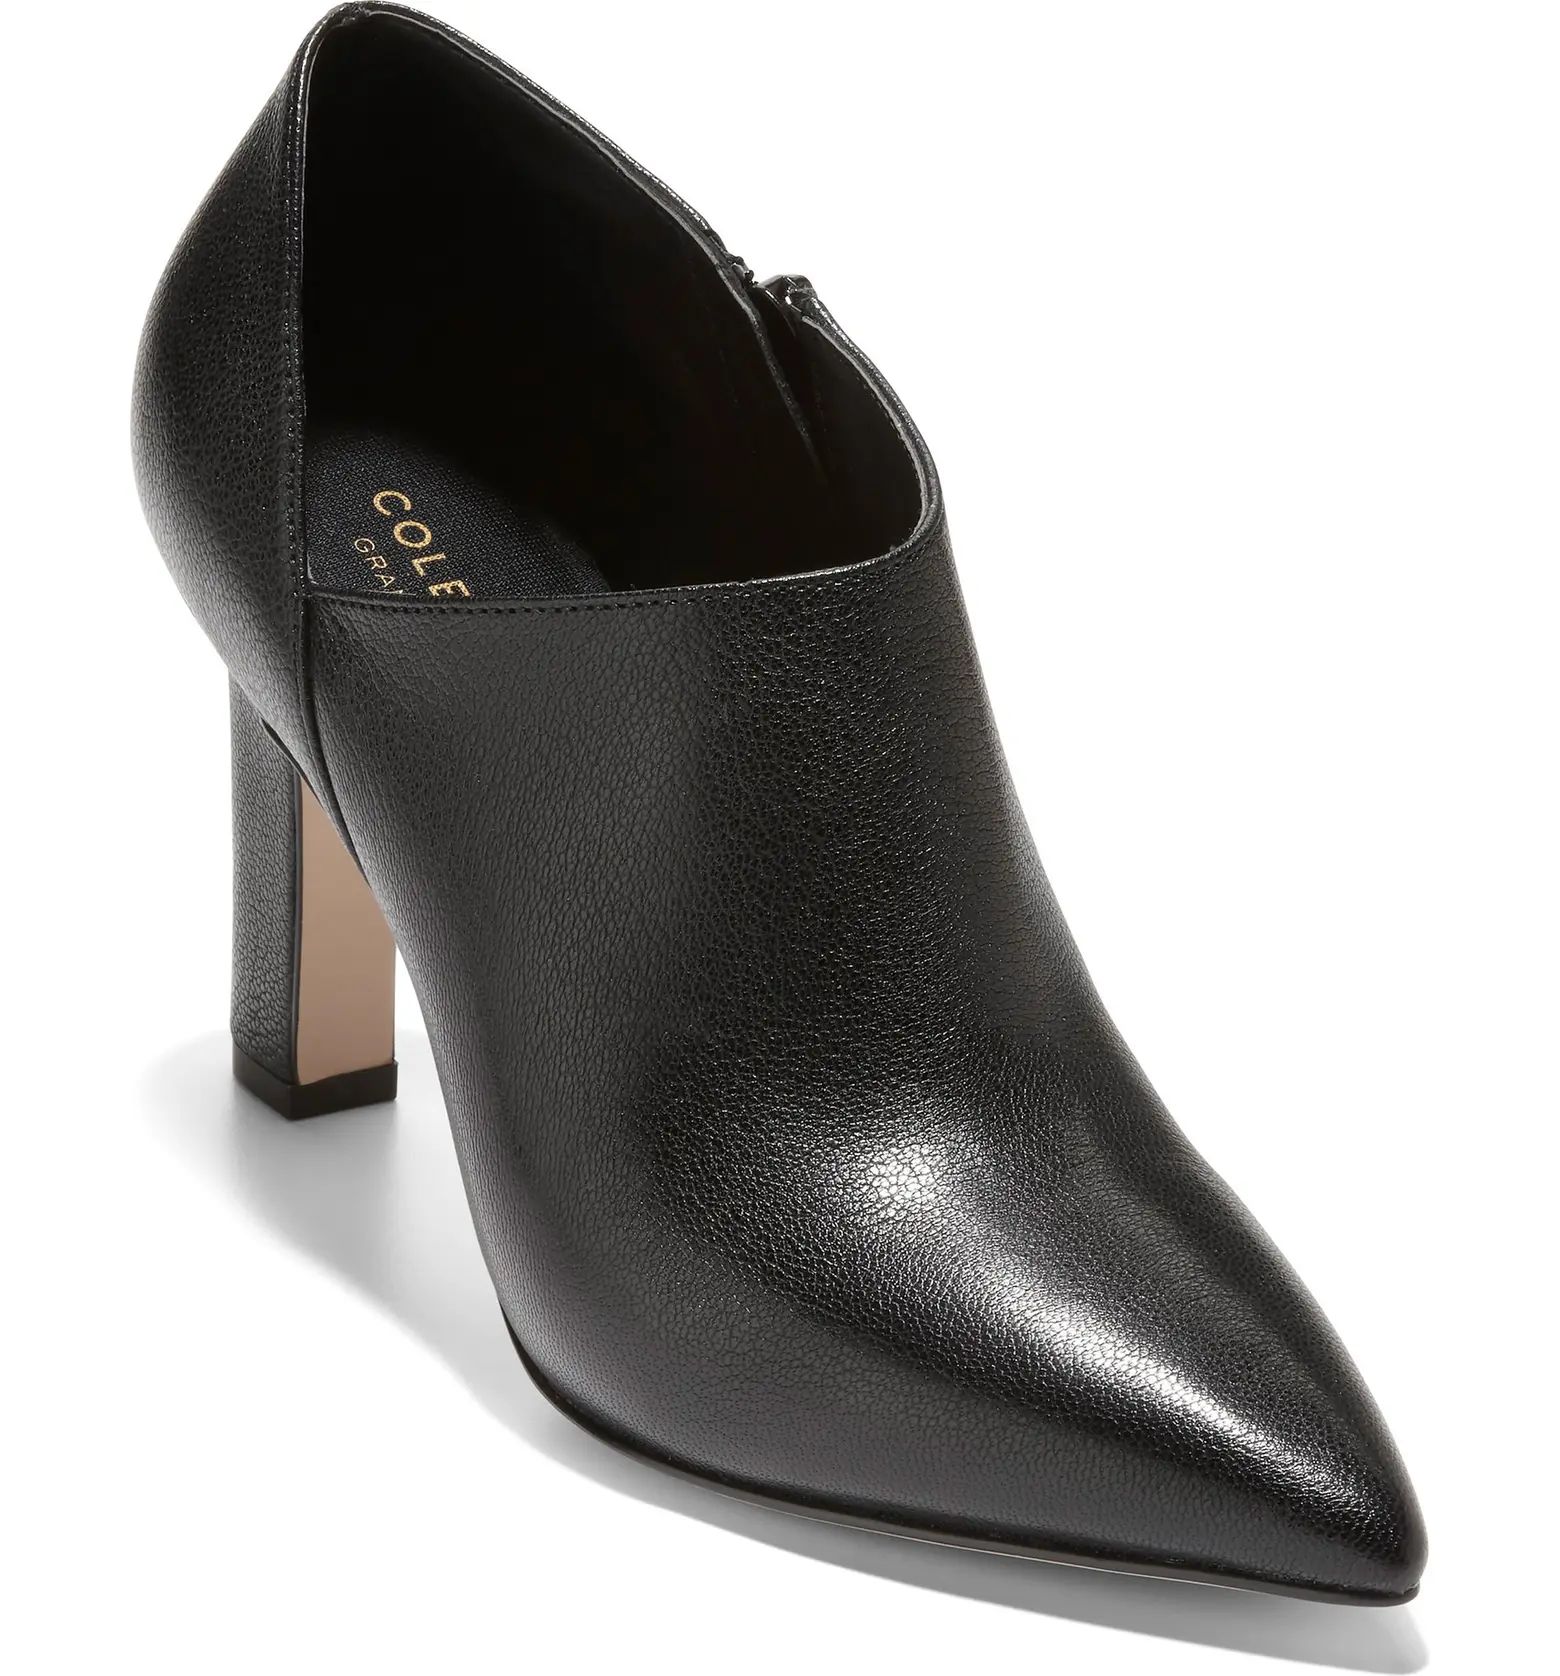 Vestry Pointed Toe BootieCOLE HAAN | Nordstrom